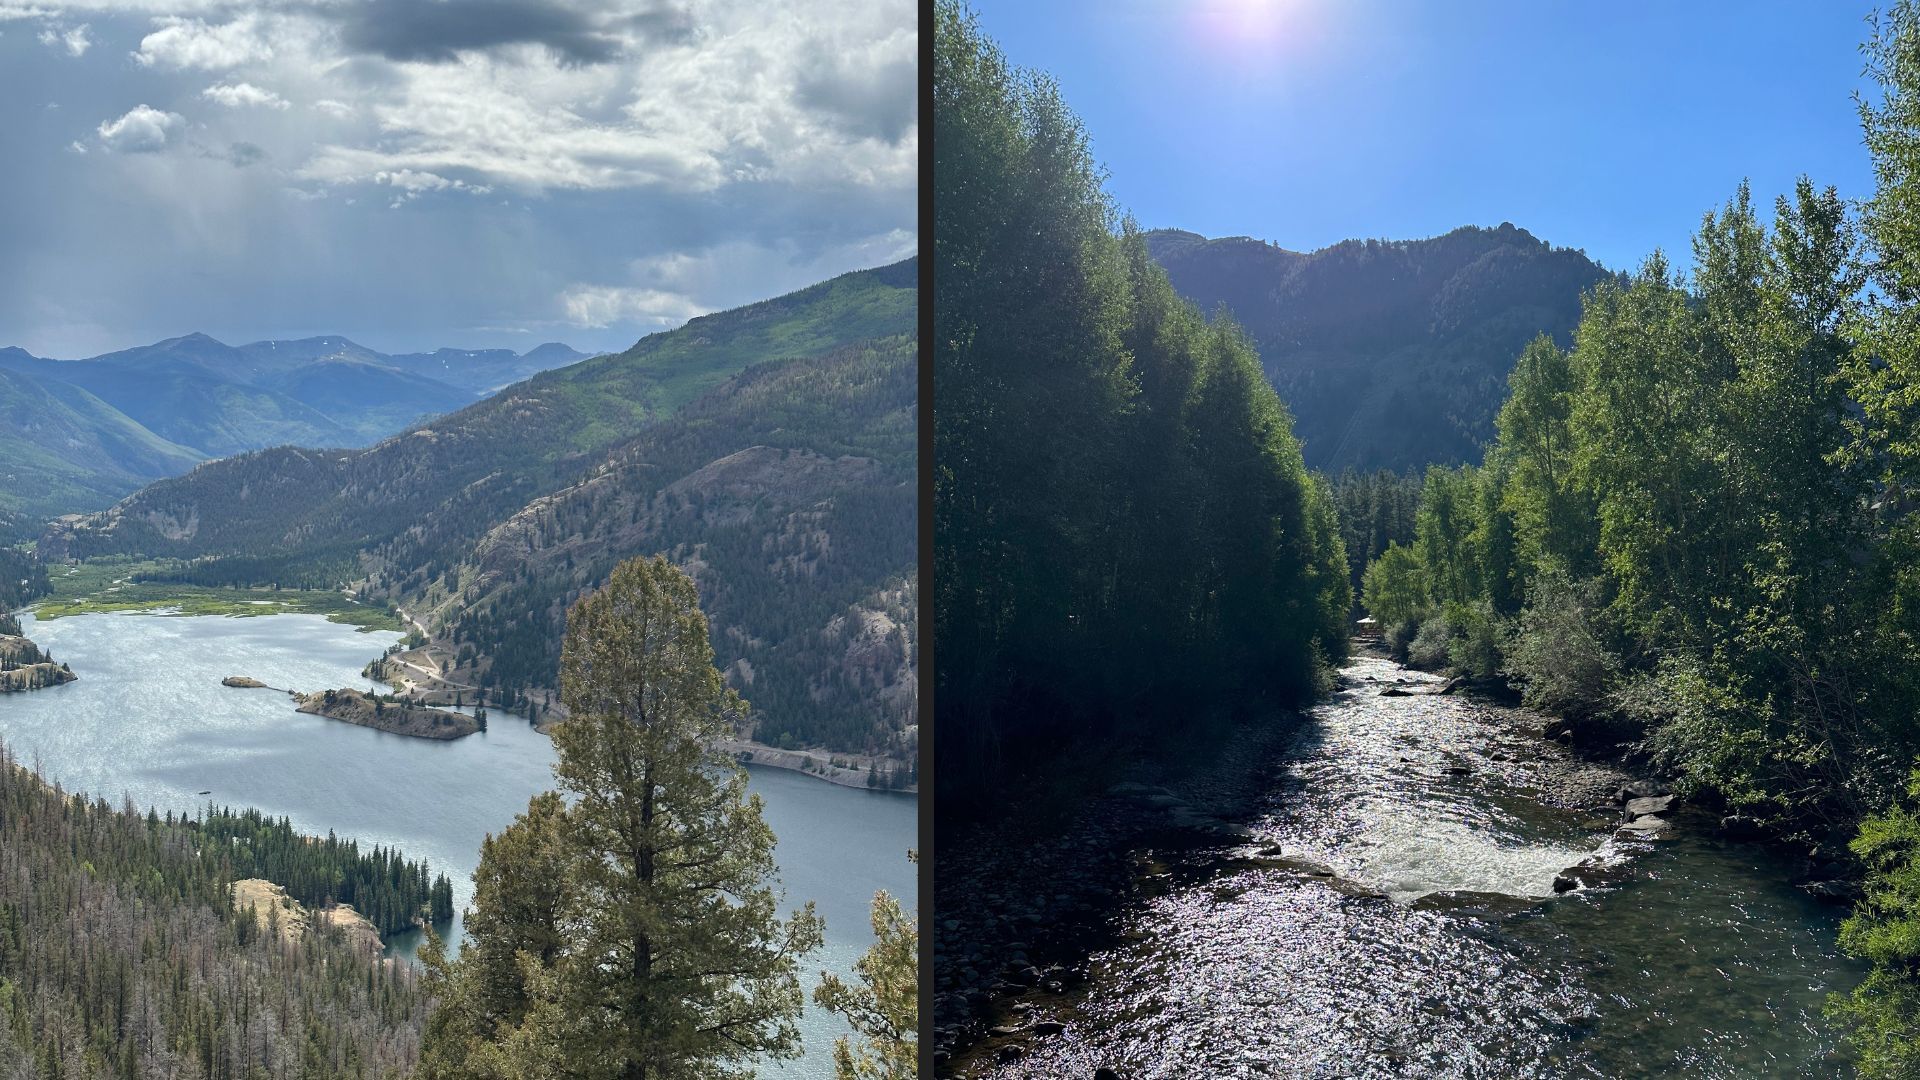 Left image: a landscape view from high up in a mountain, overlooking a lake surrounded by mountains. Right image: a river surrounded by trees on a sunny day